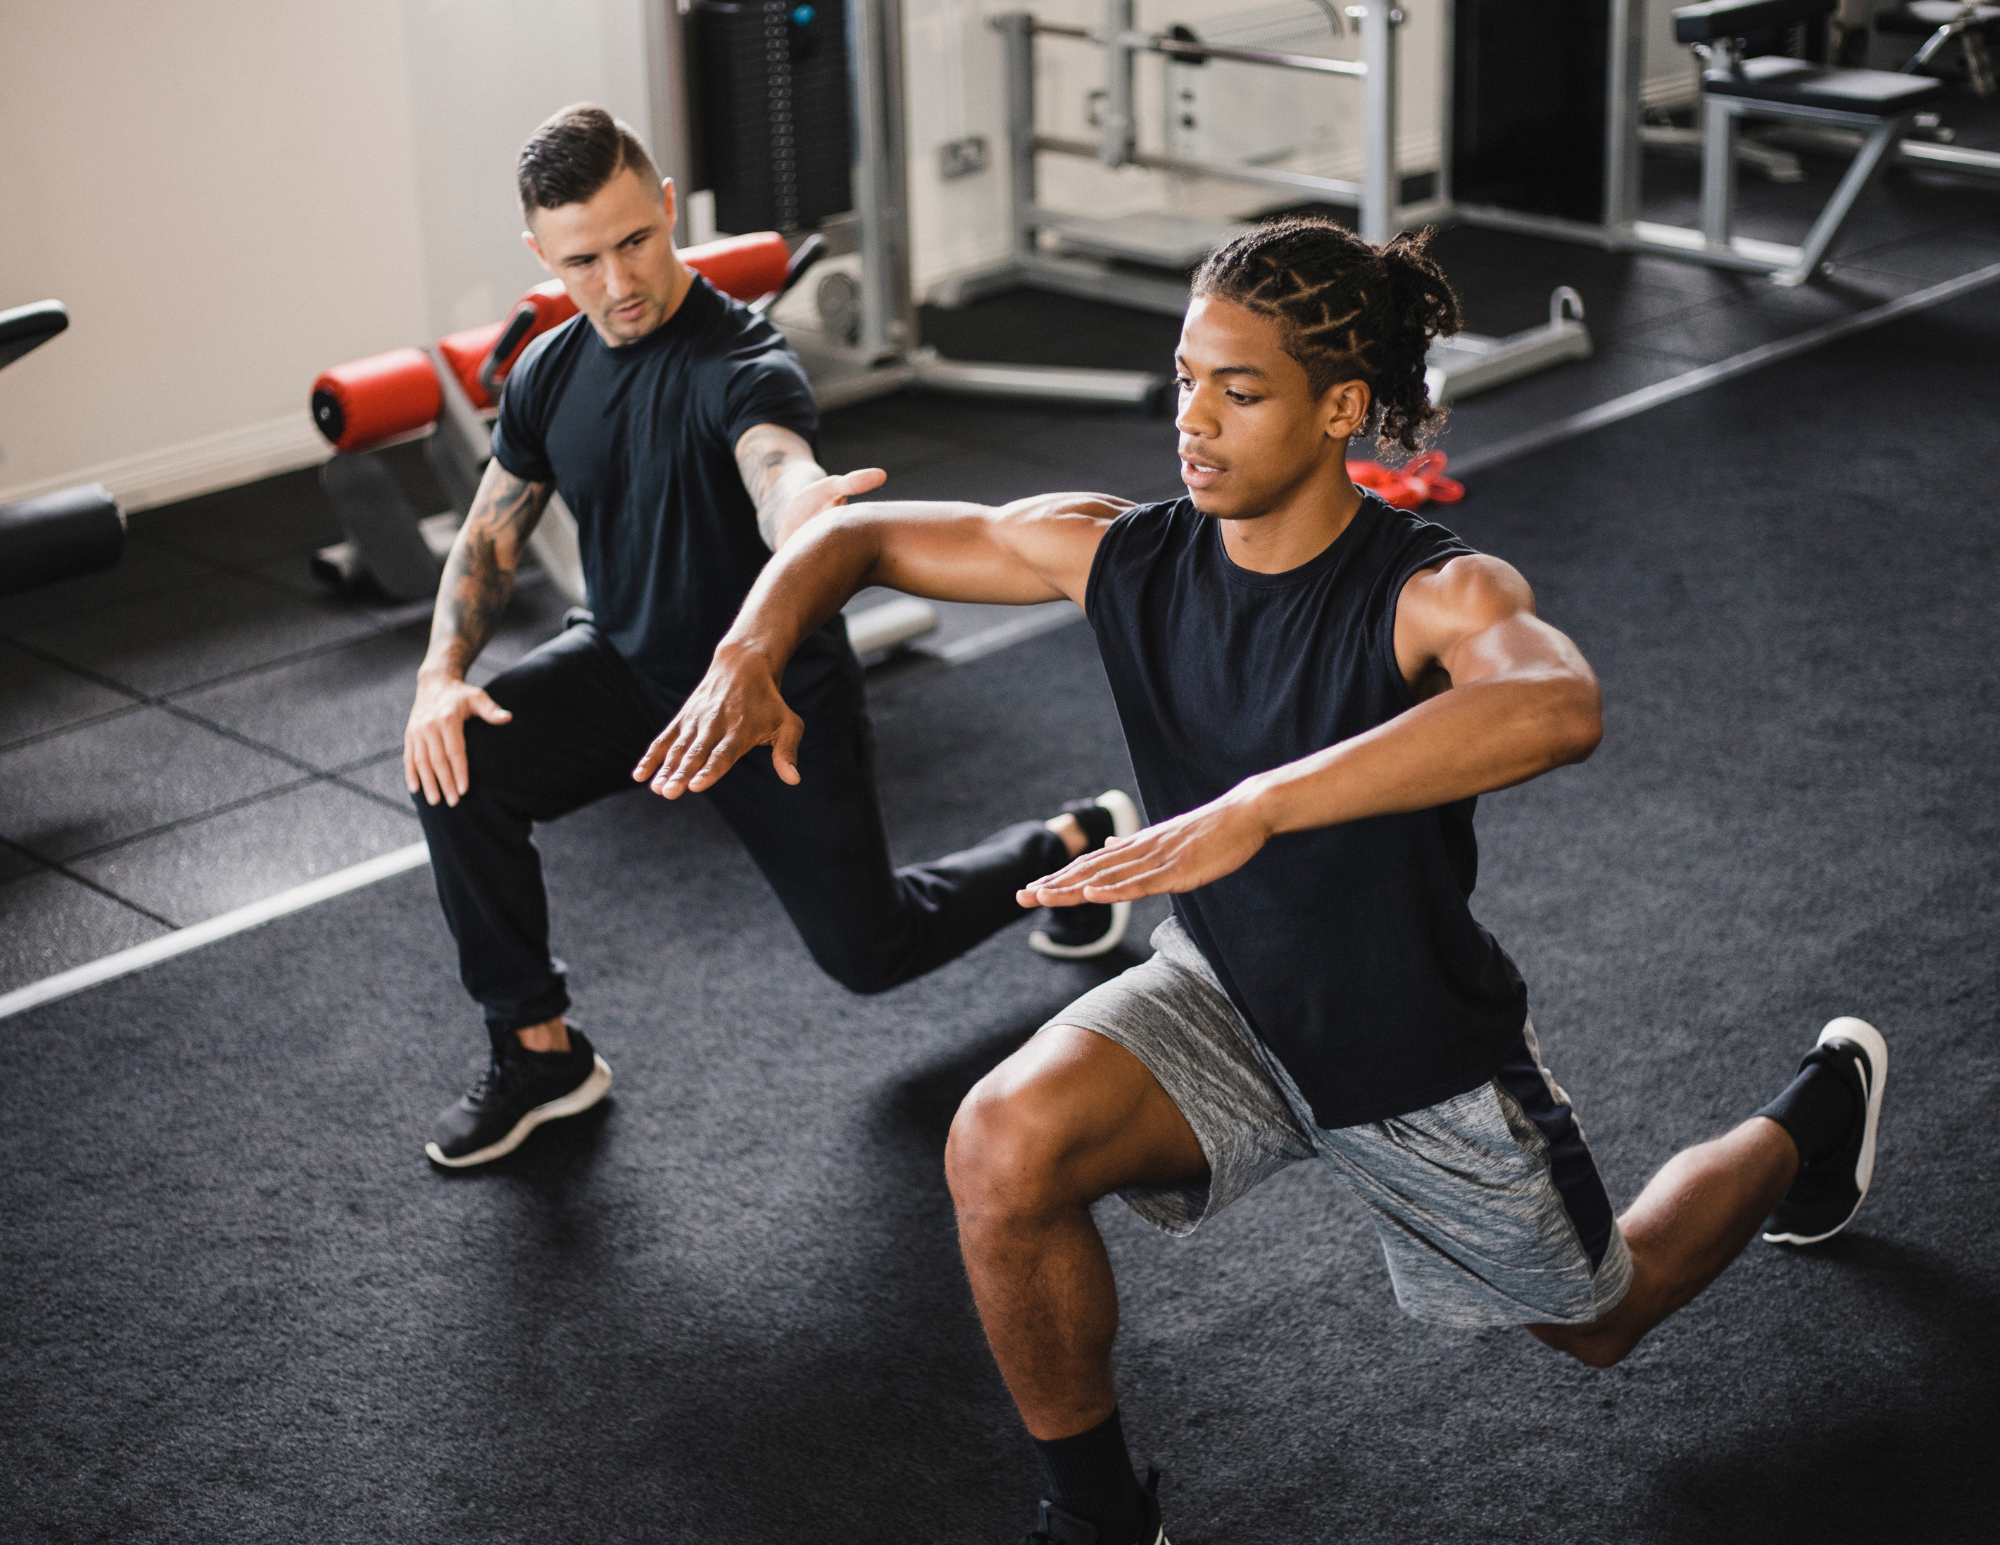 Experience Your Gym Come True at Fitness Connection